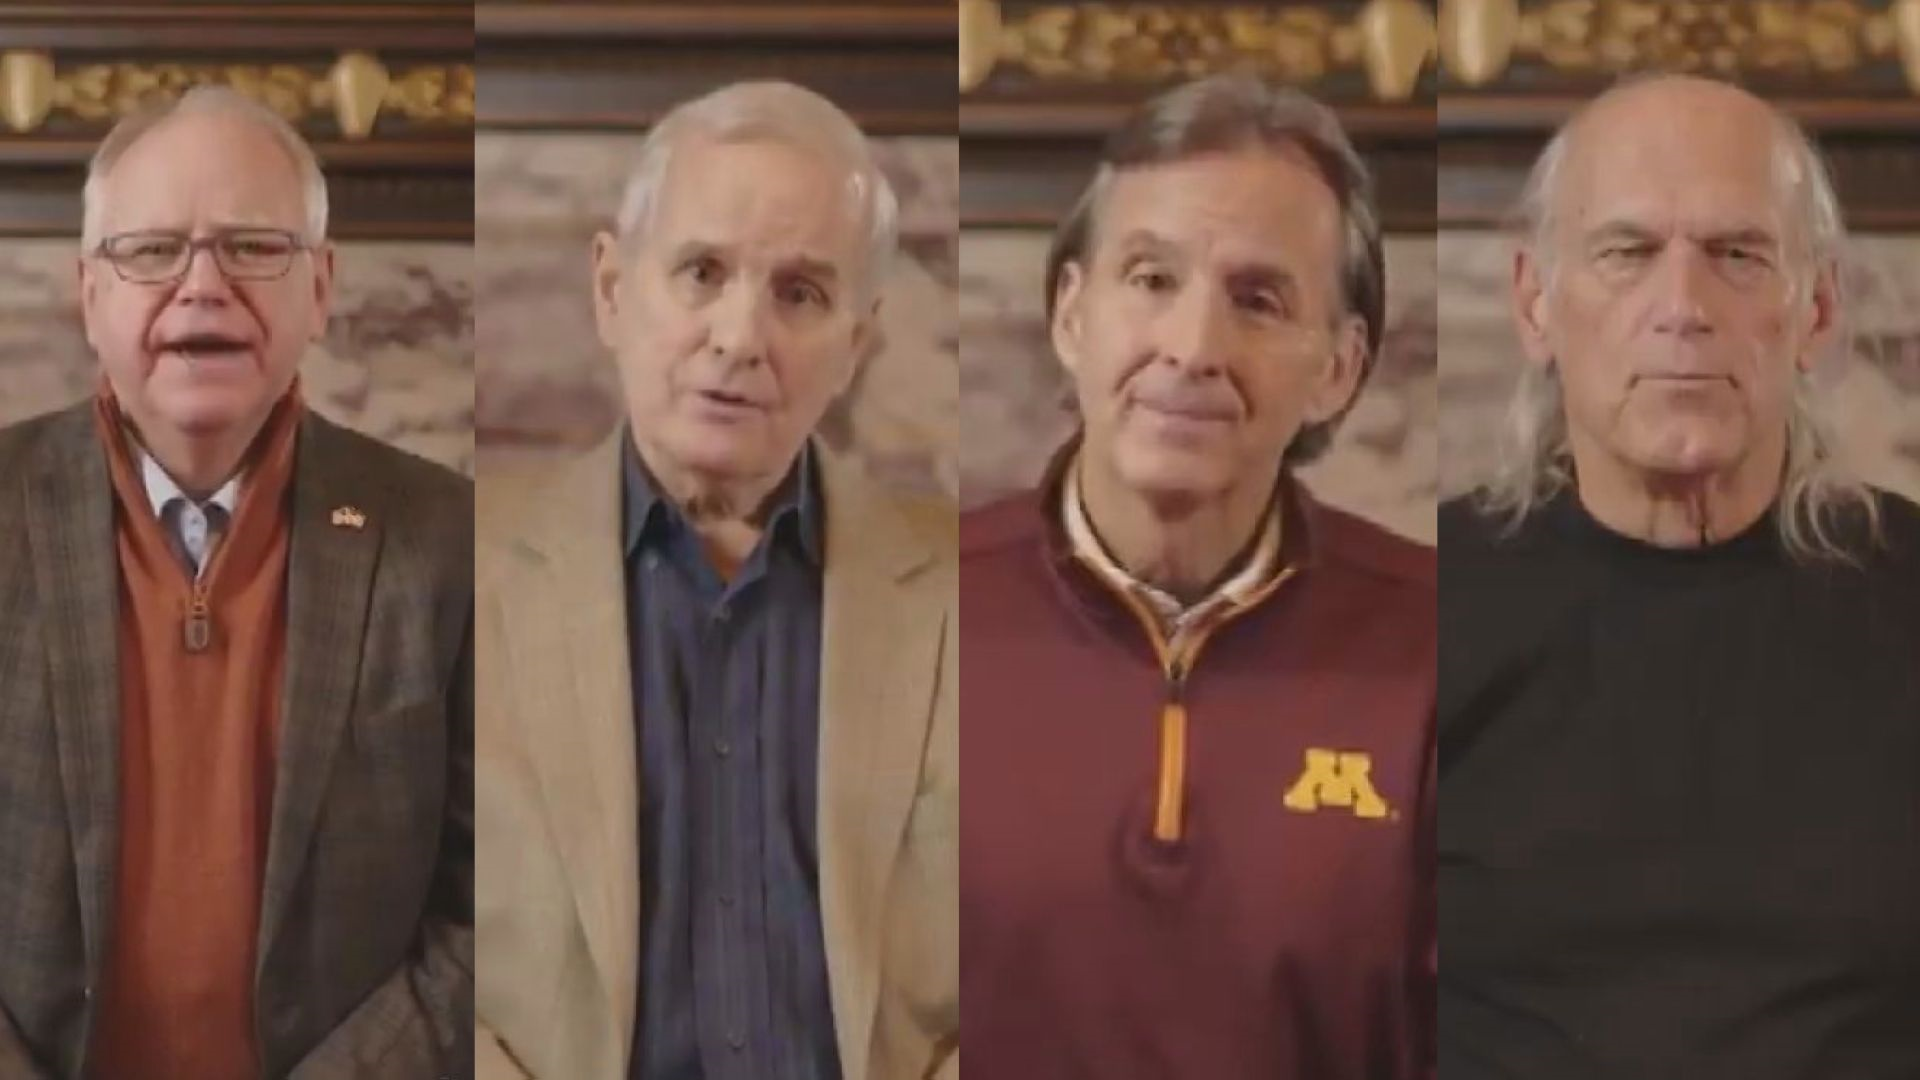 Gov. Tim Walz is joined by former Govs. Dayton, Pawlenty and Ventura in the non-partisan public service announcement.